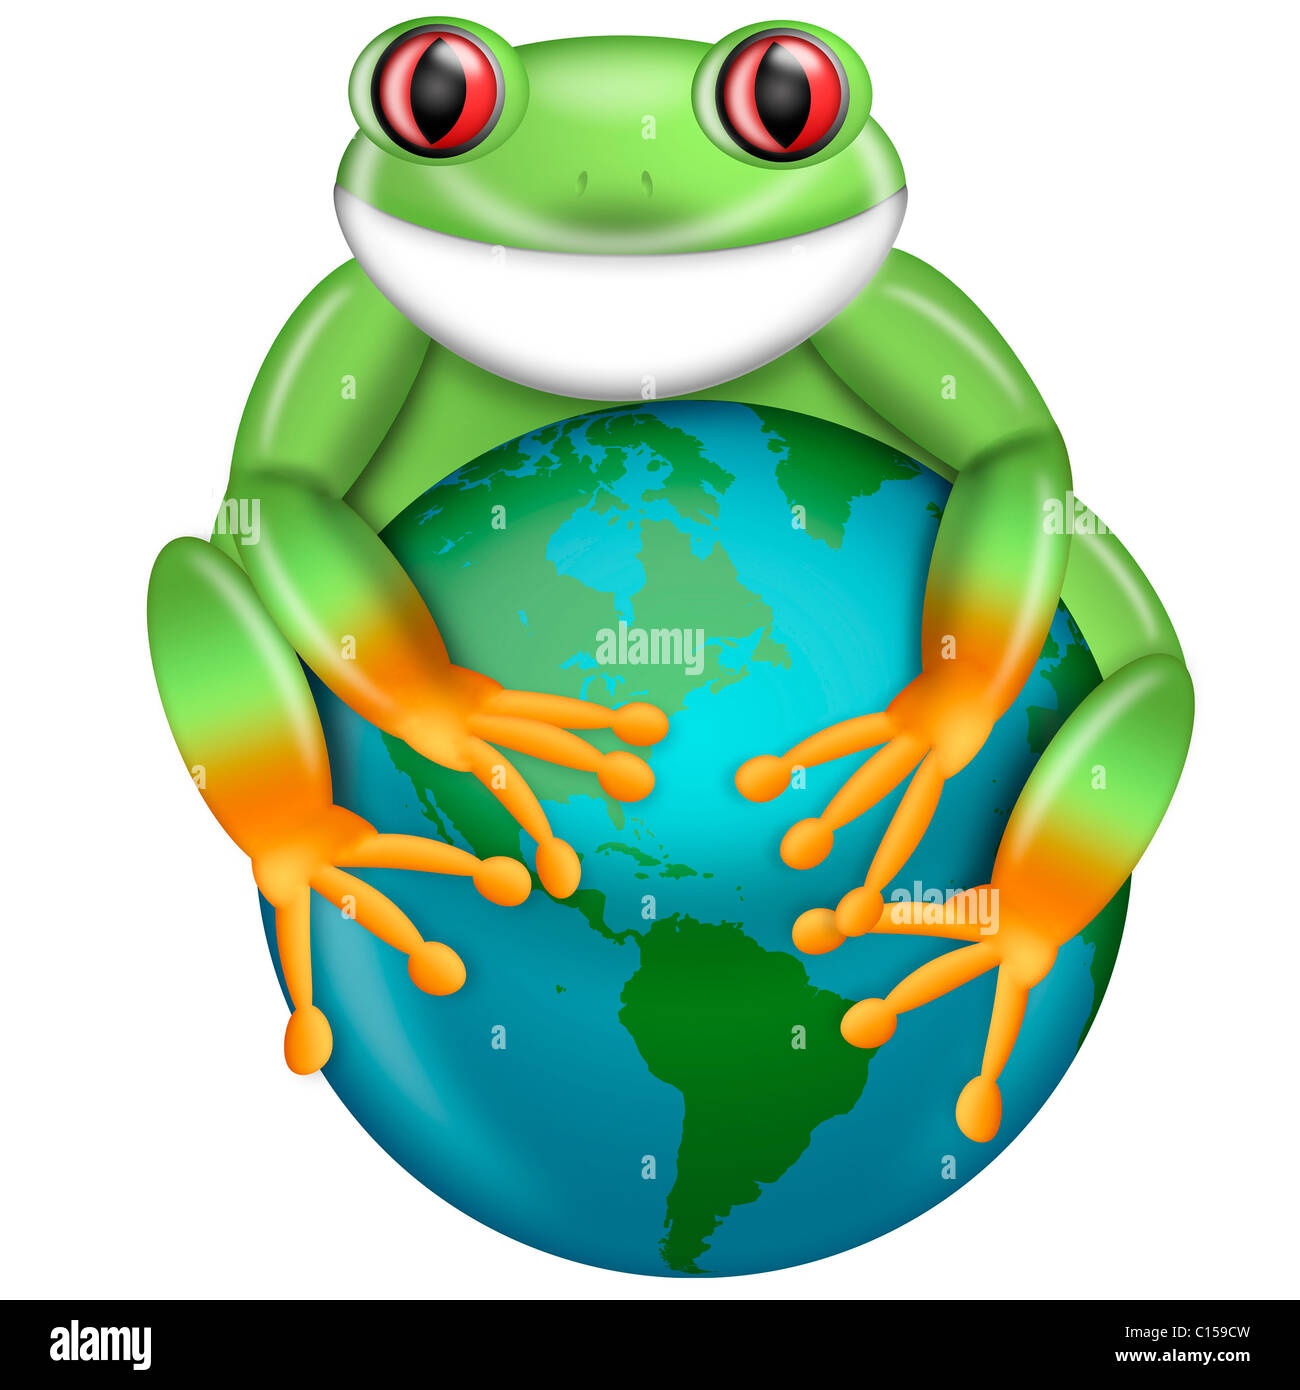 Red-Eyed Green Tree Frog Hugging Planet Earth Globe Illustration Stock Photo